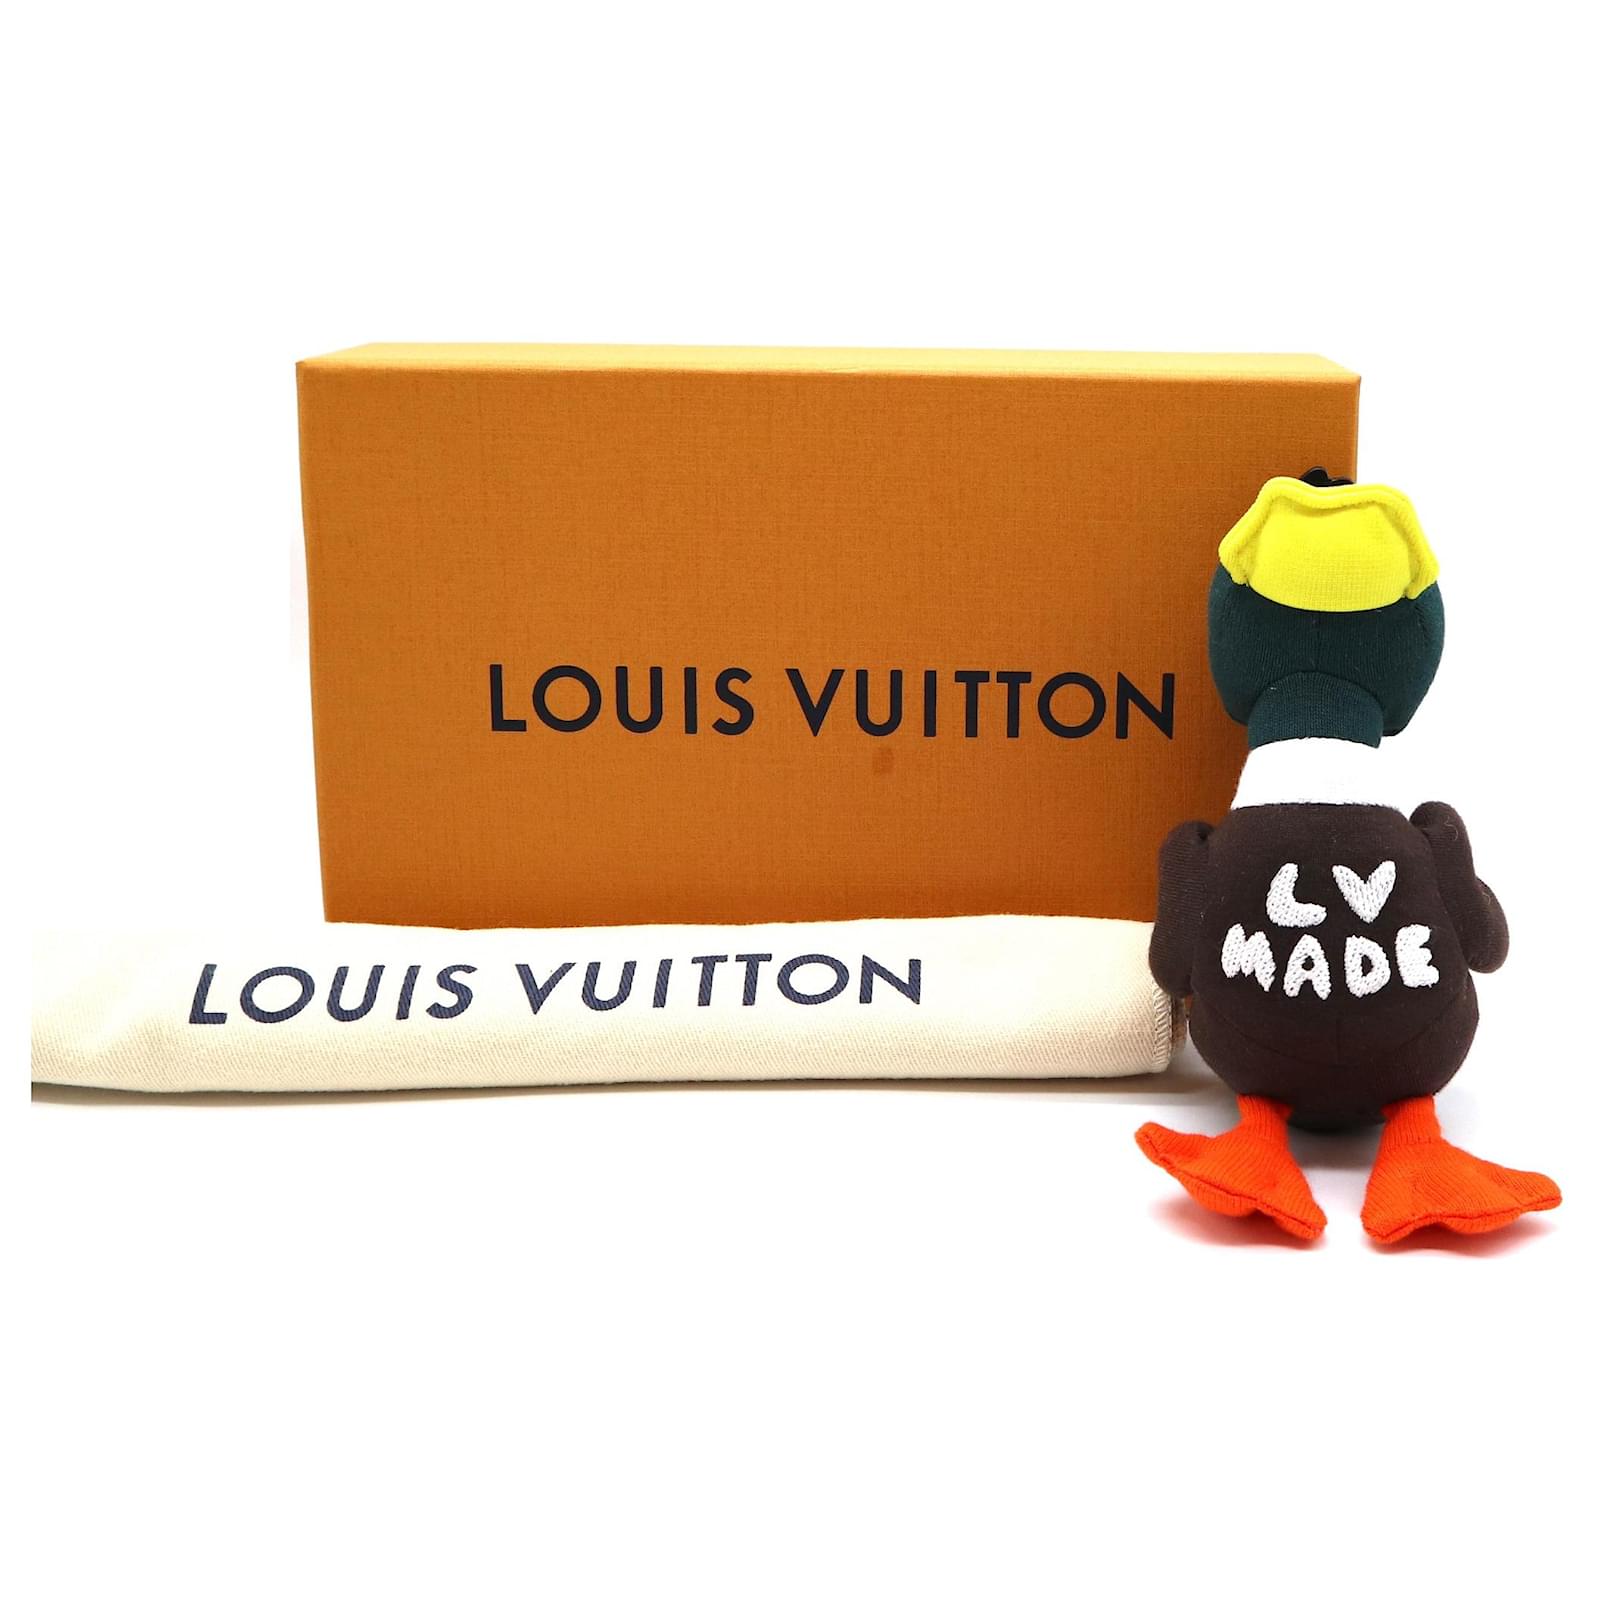 Louis Vuitton LV Made Duck Bag Charm and Key Holder